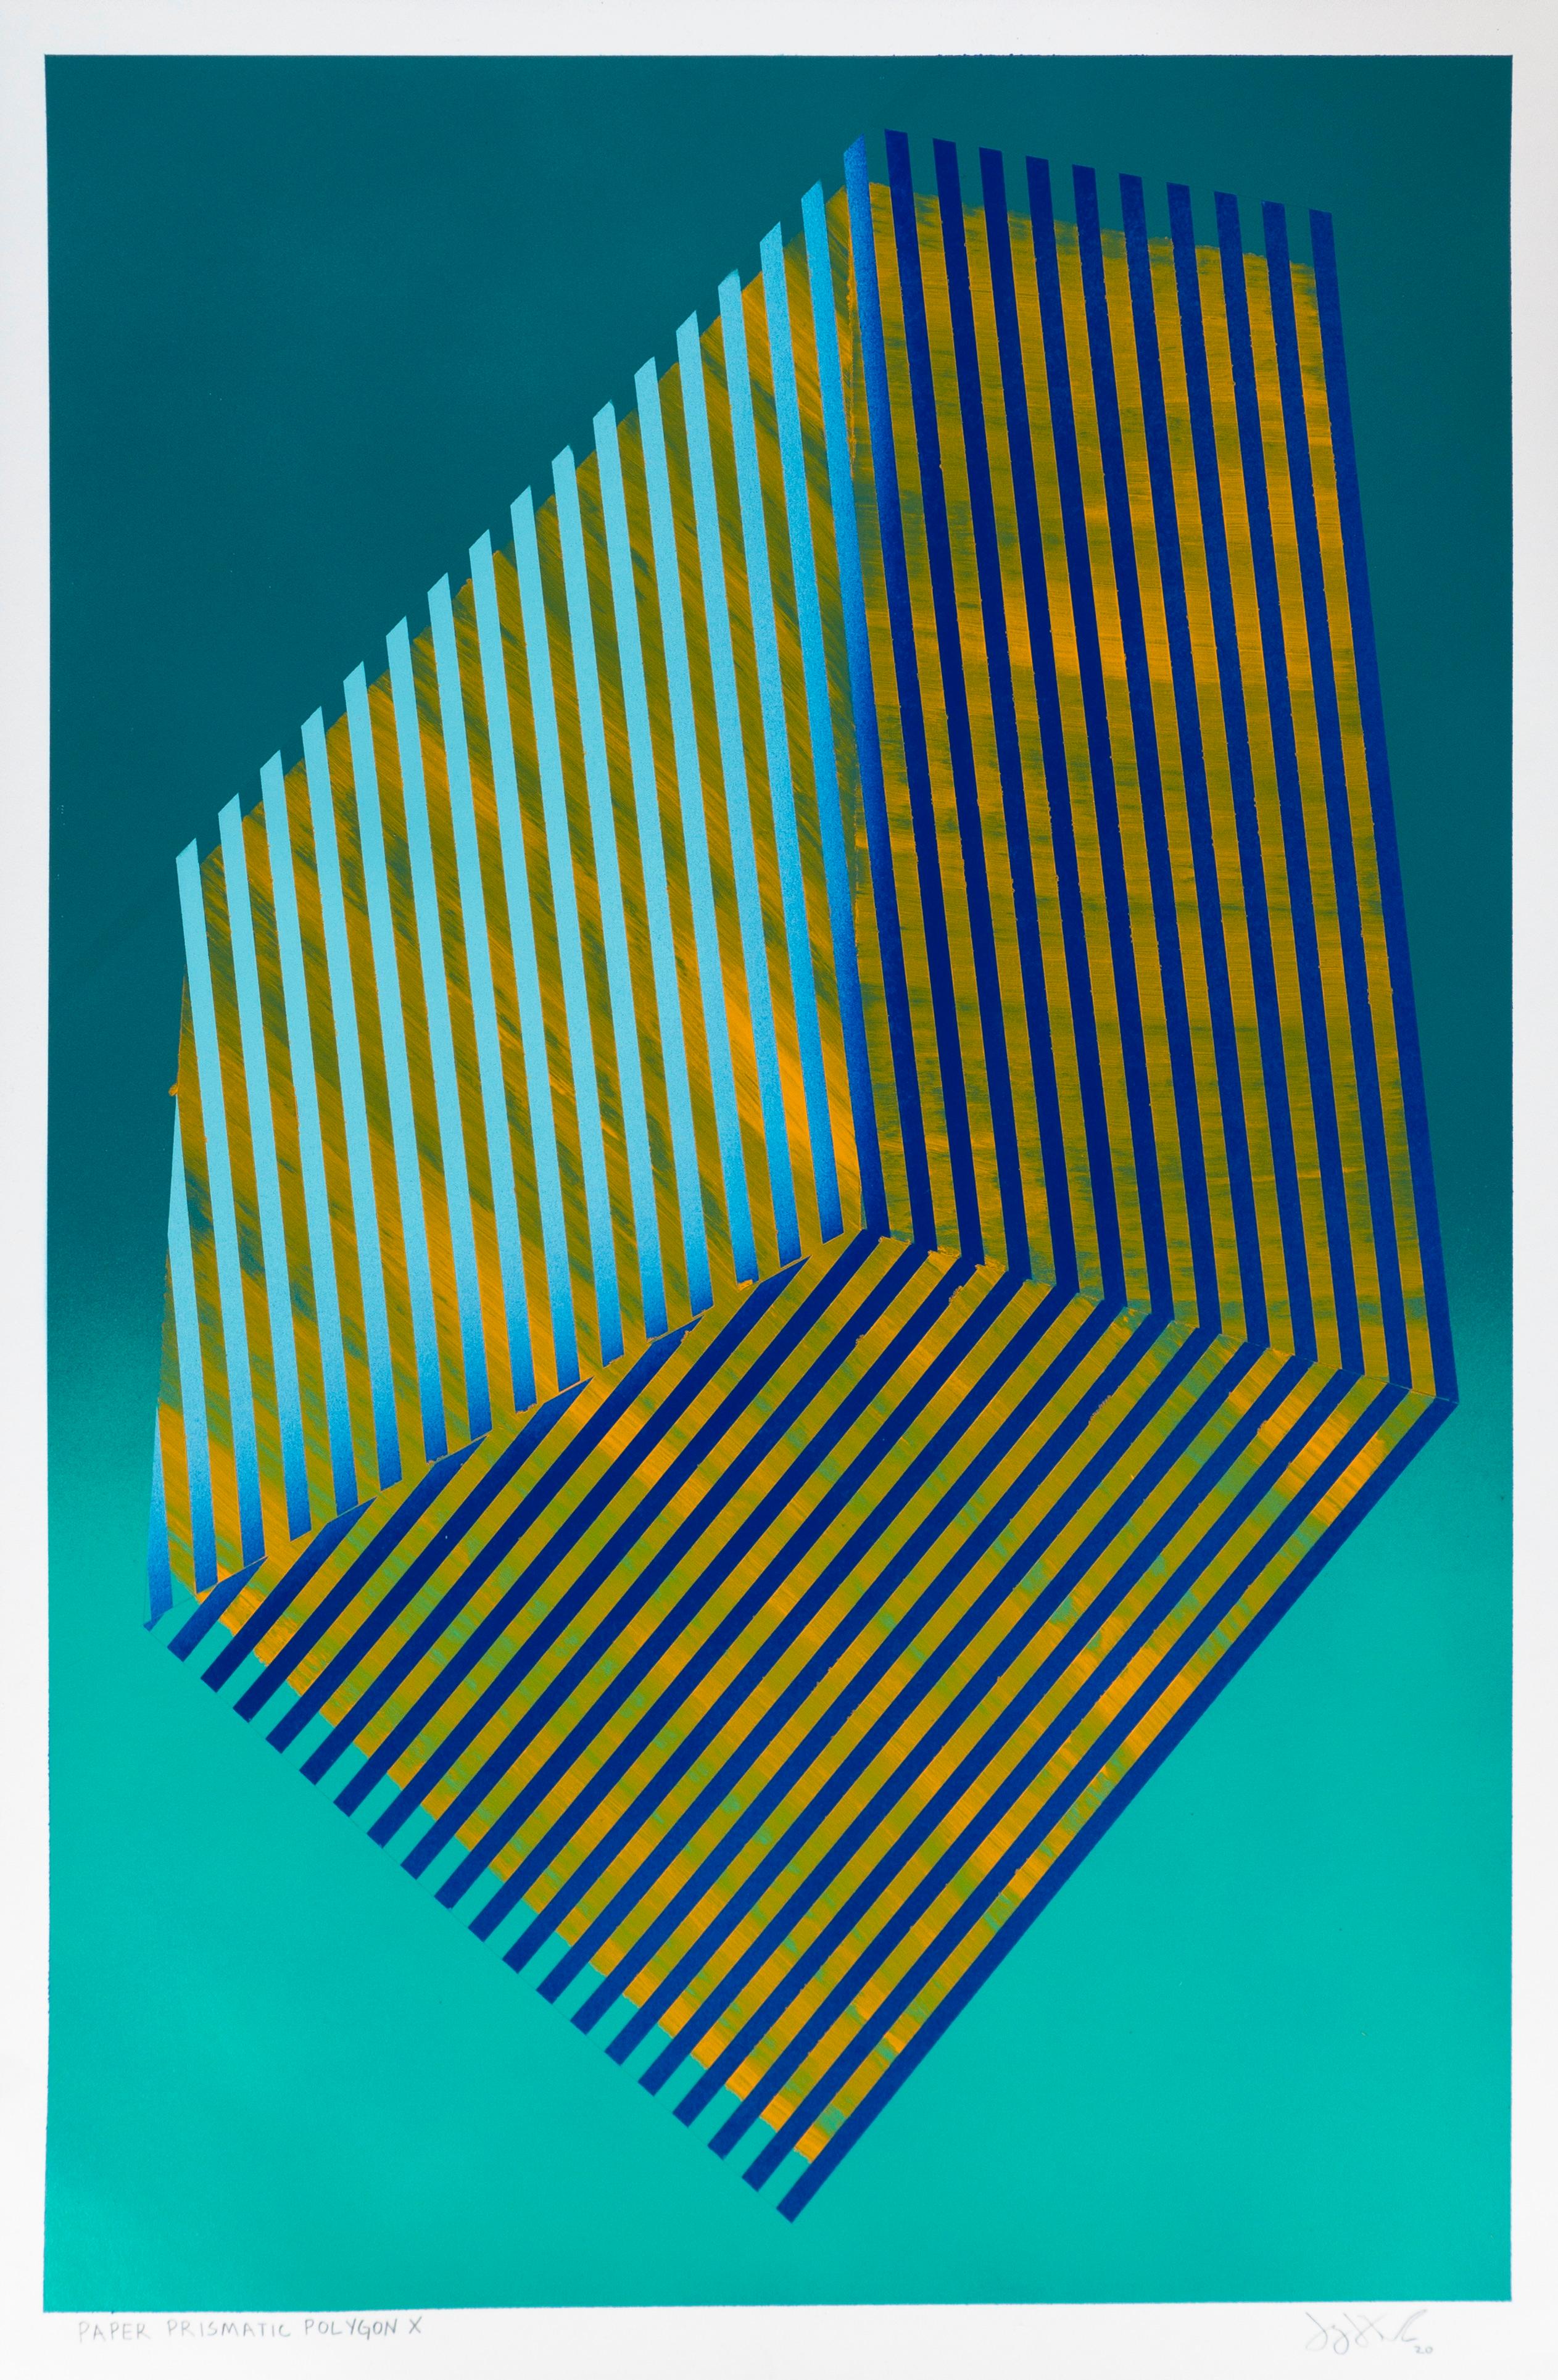 Jay Walker Figurative Painting - Prismatic Polygon X: geometric abstract painting in green, blue, & yellow lines